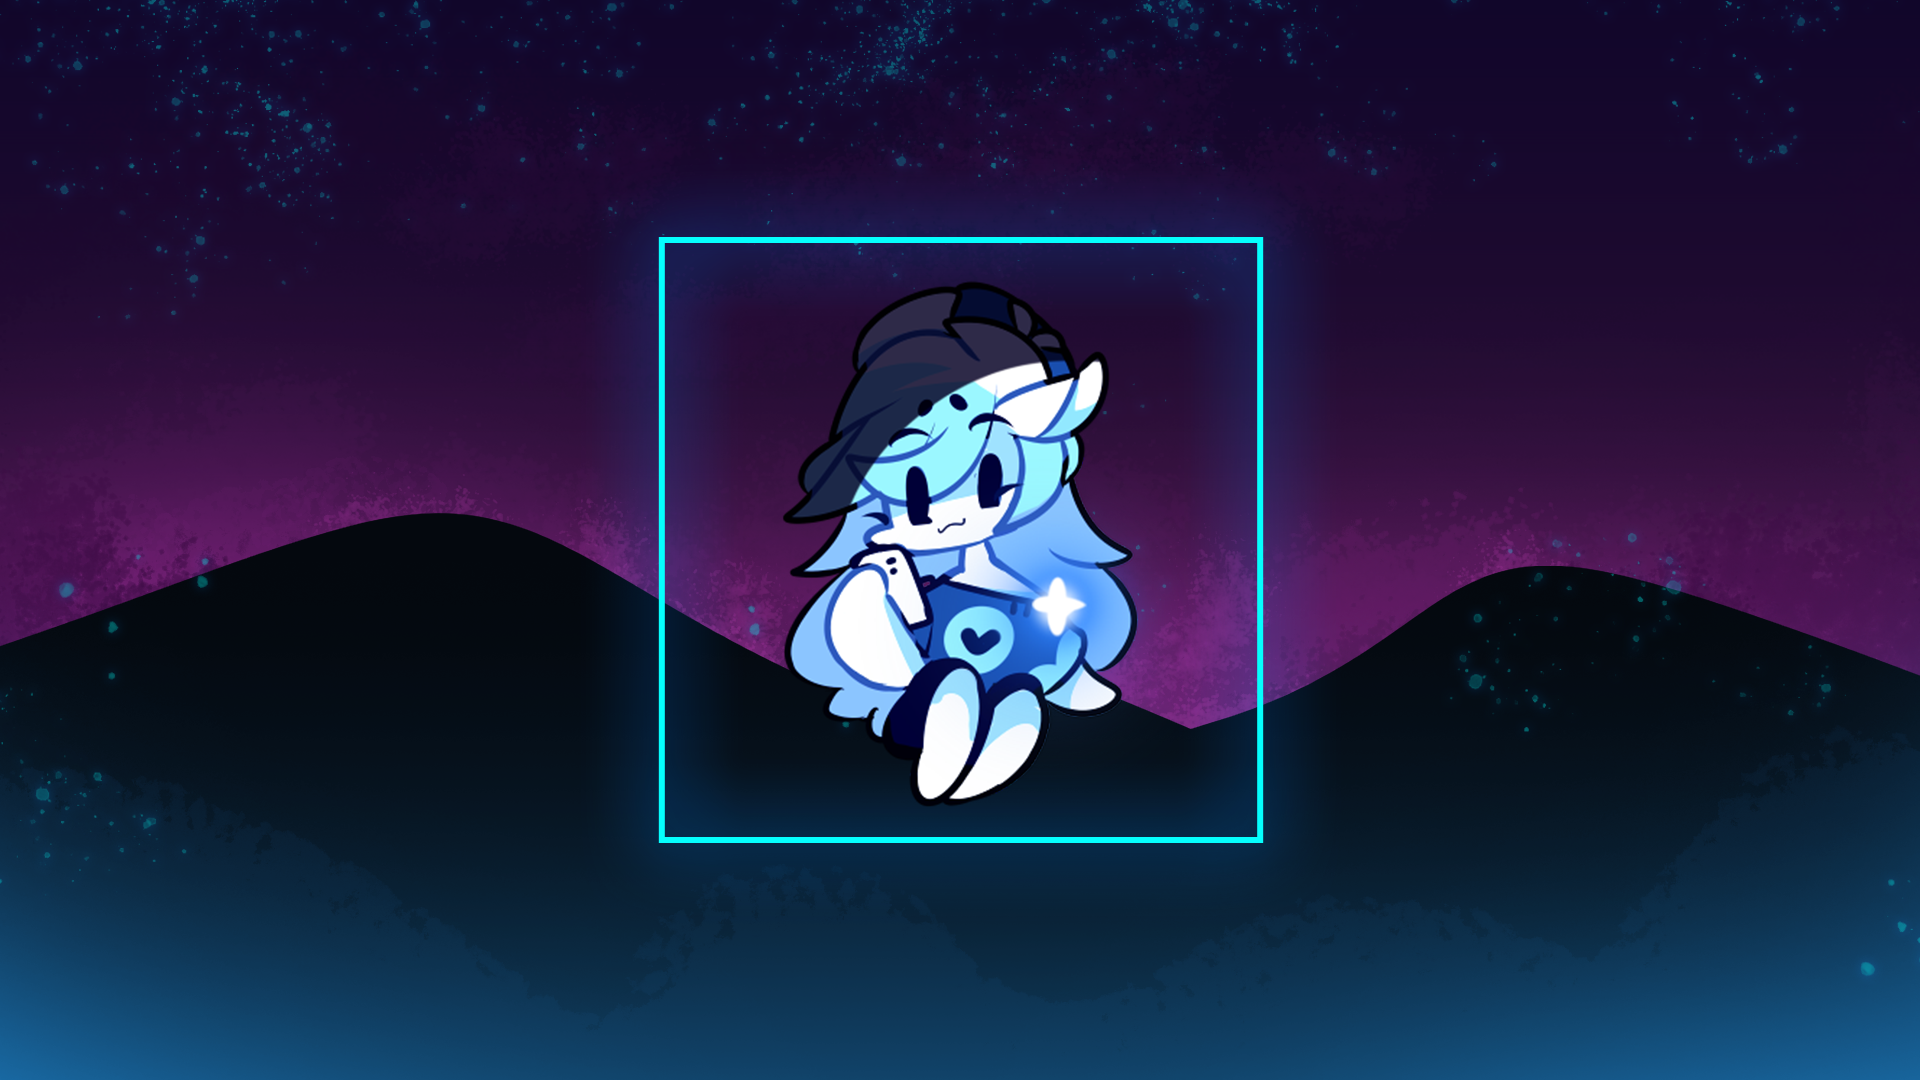 Icon for OMG!